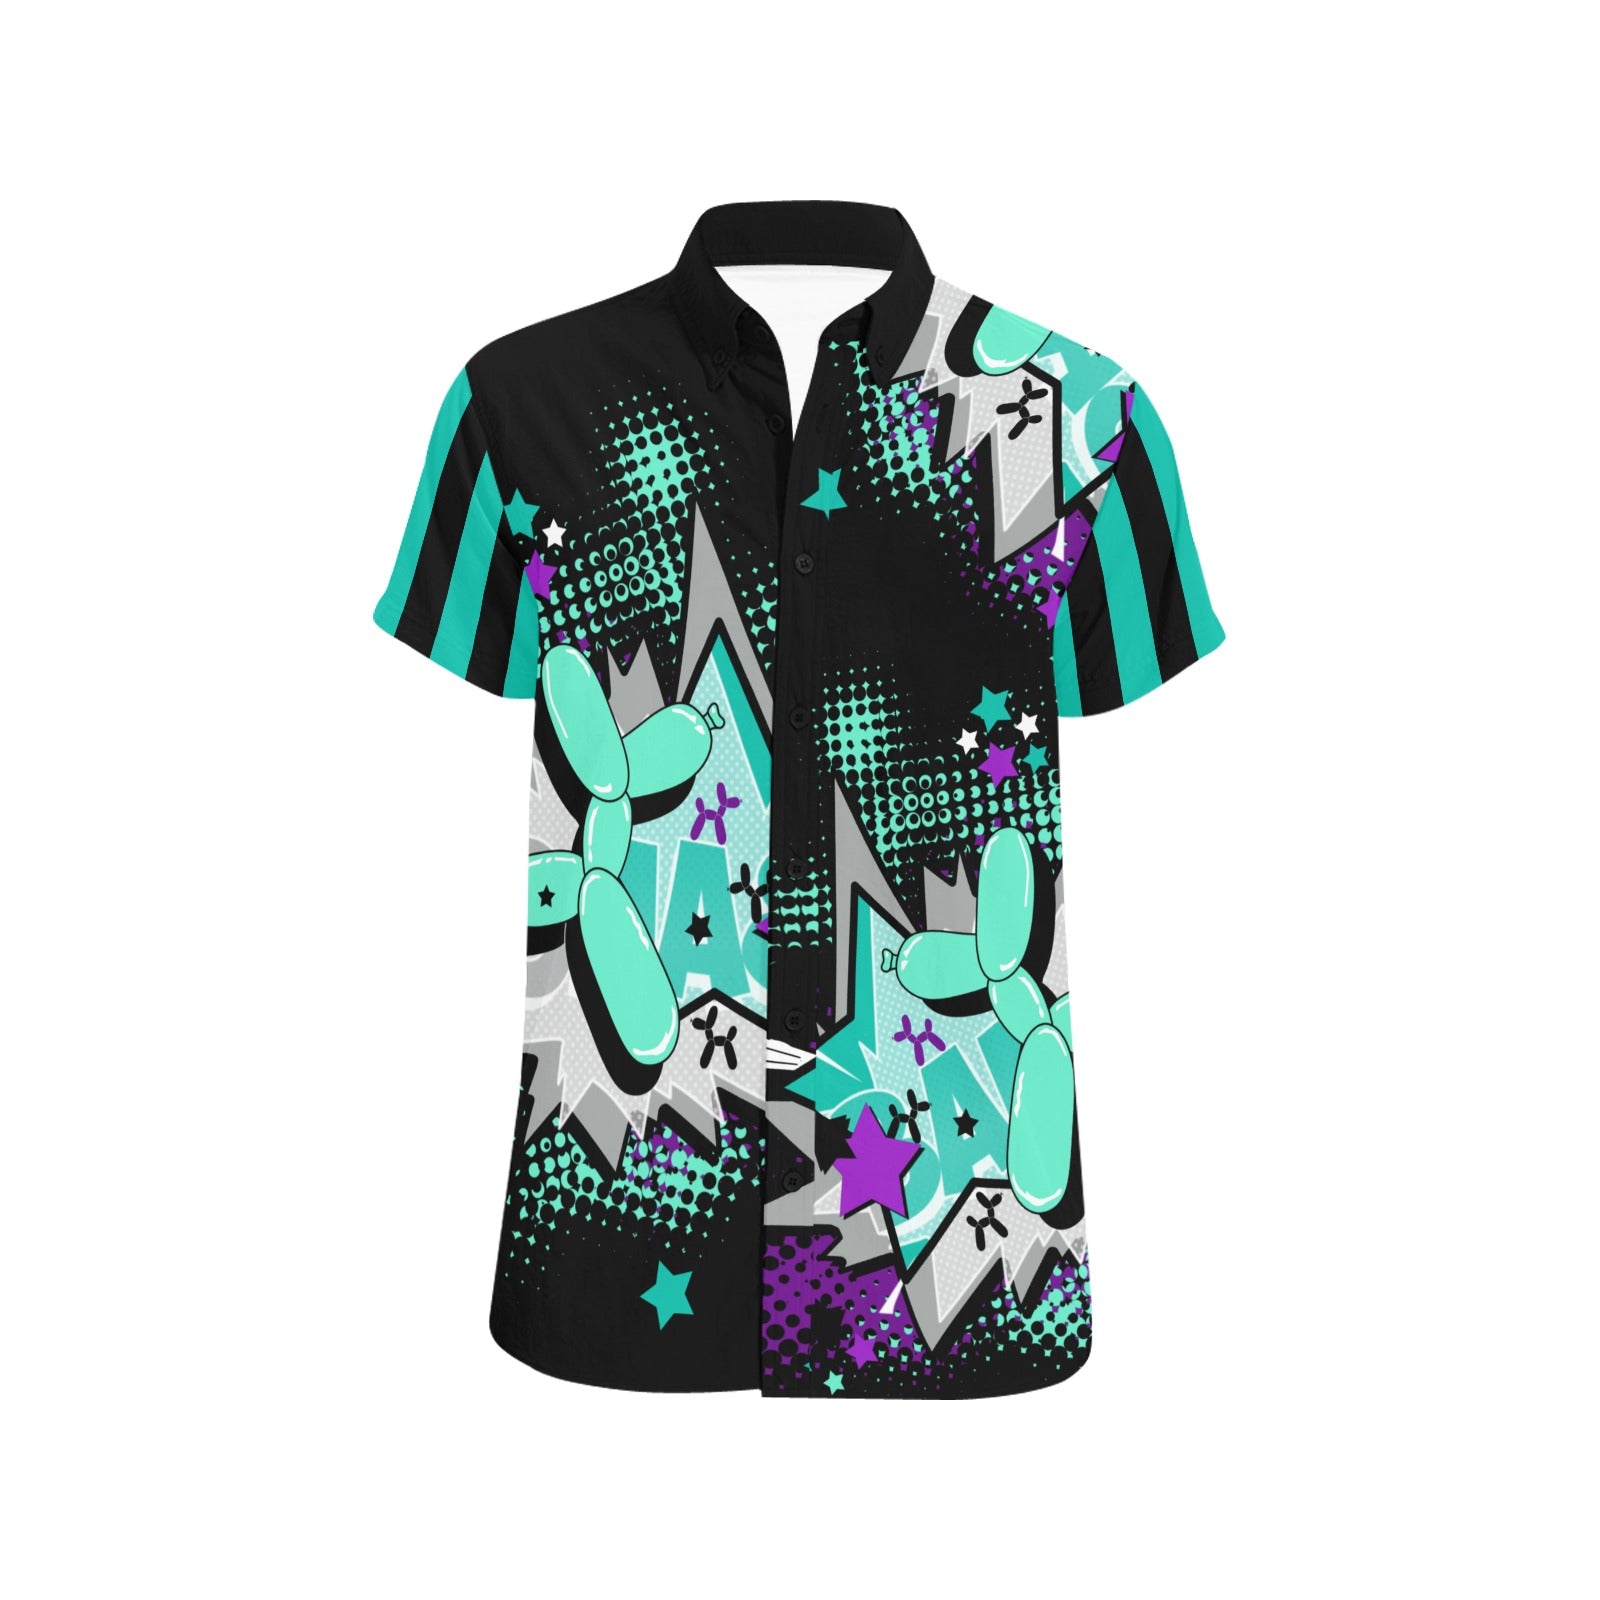 Balloon Twister Shirt teal Black And white